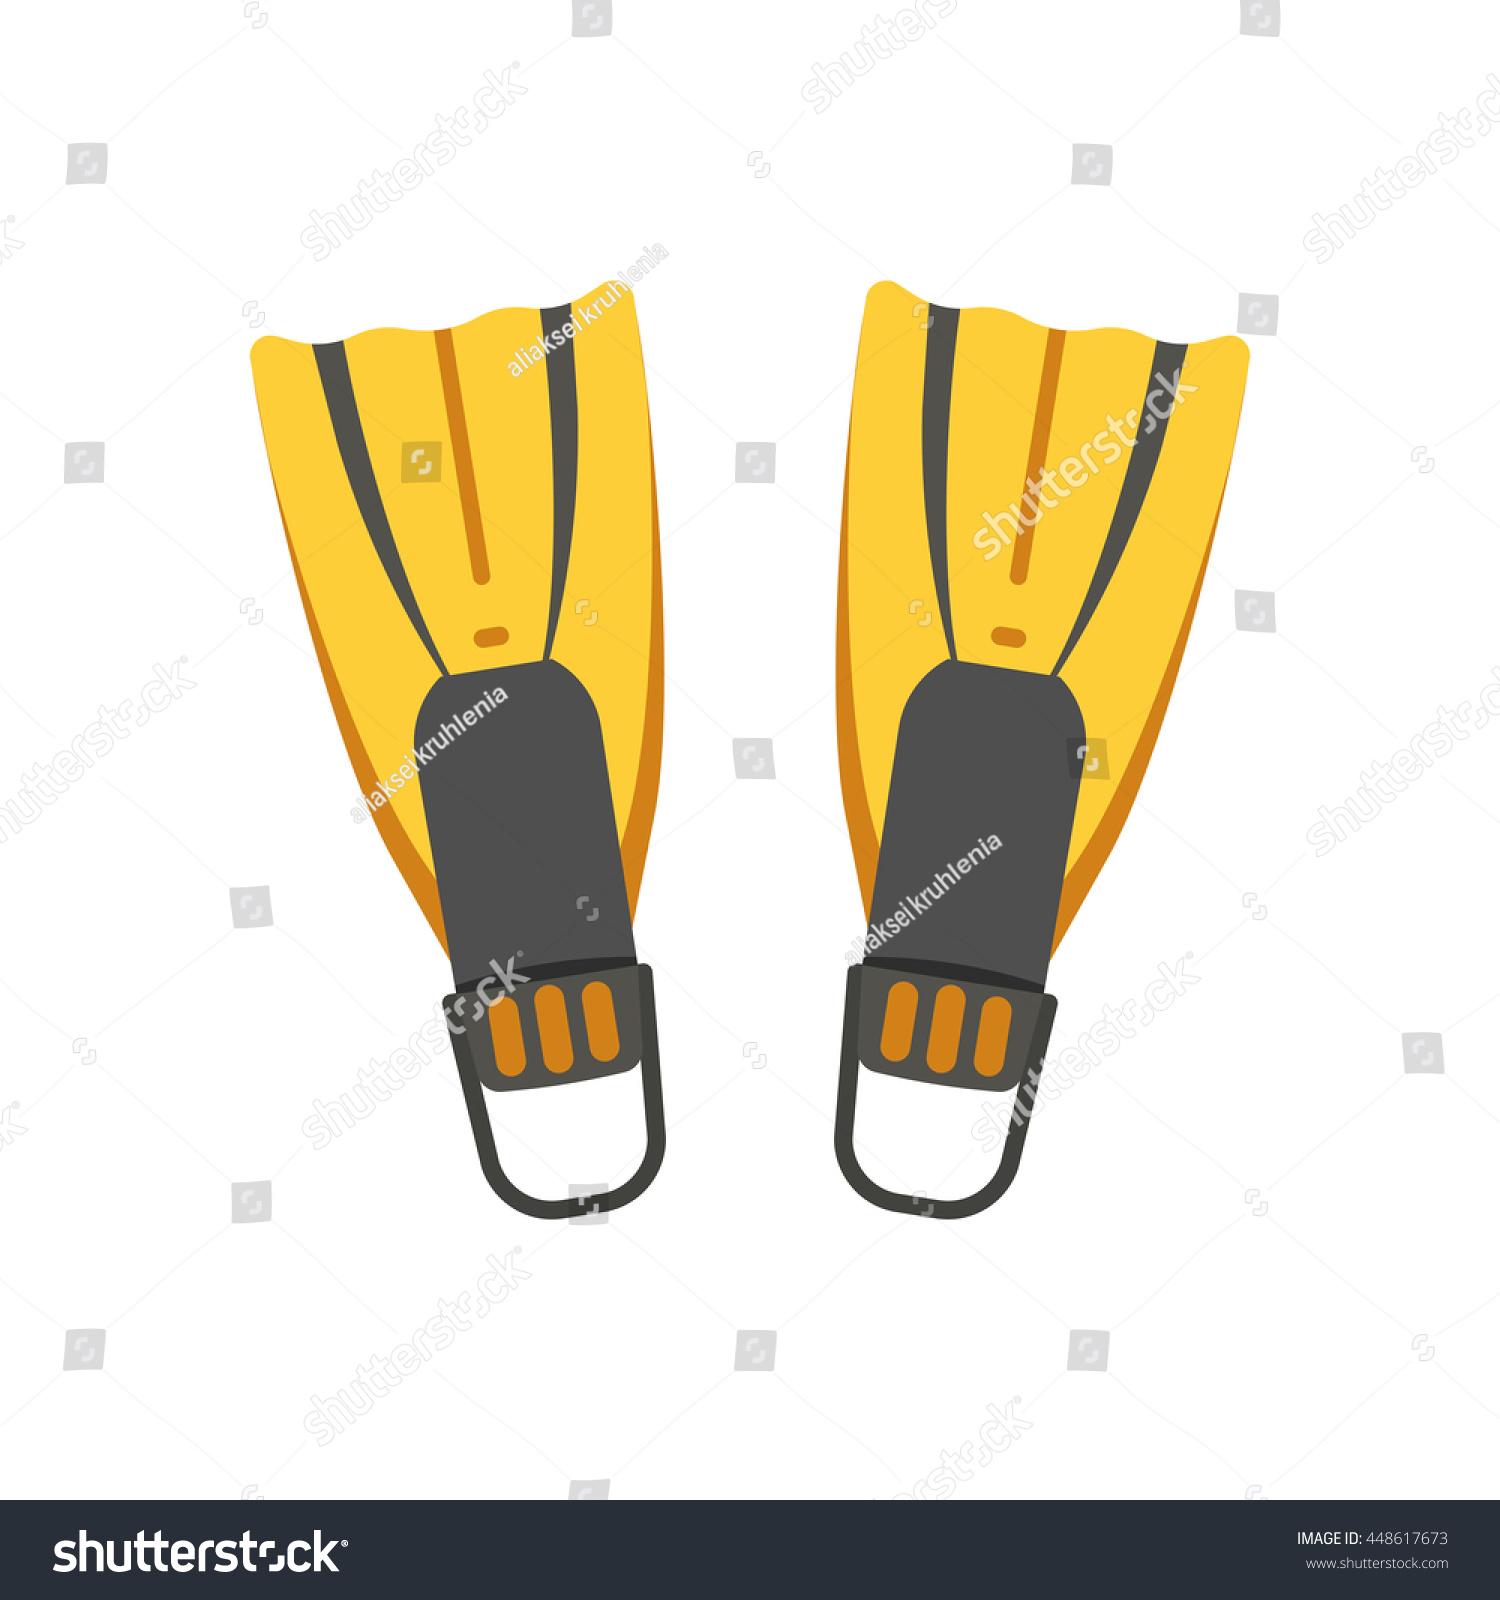 protective footwear for swimming